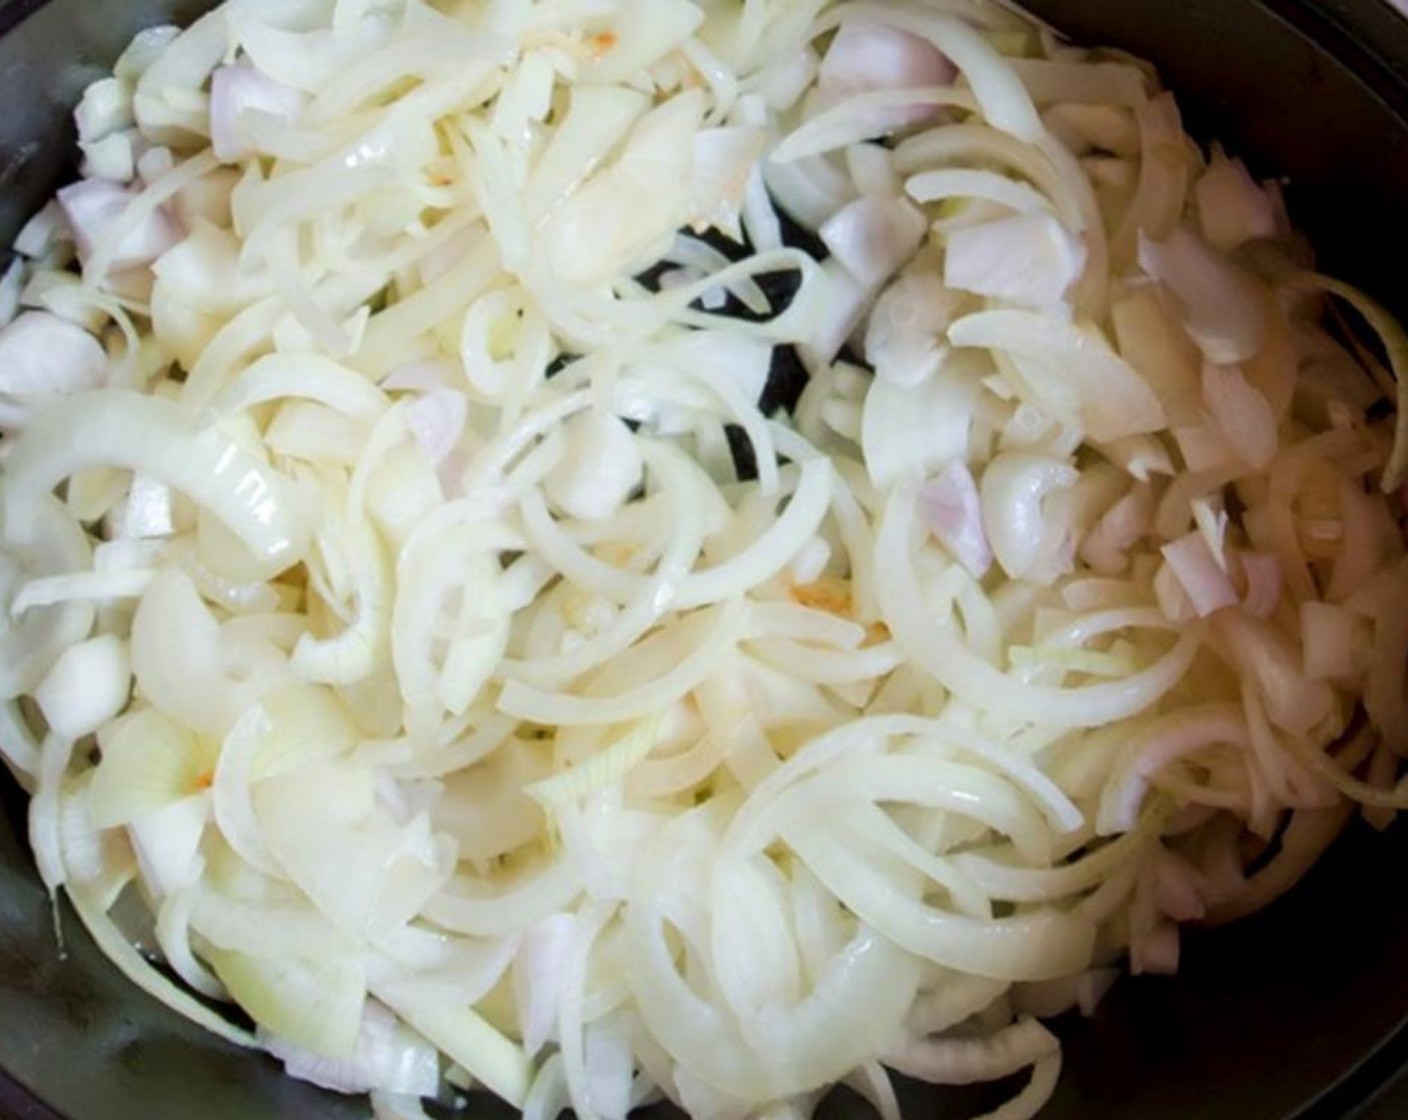 step 2 Lower the heat to medium and cover with a lid. Leave until the onions are soft and translucent, about 25 minutes. Stir occasionally.